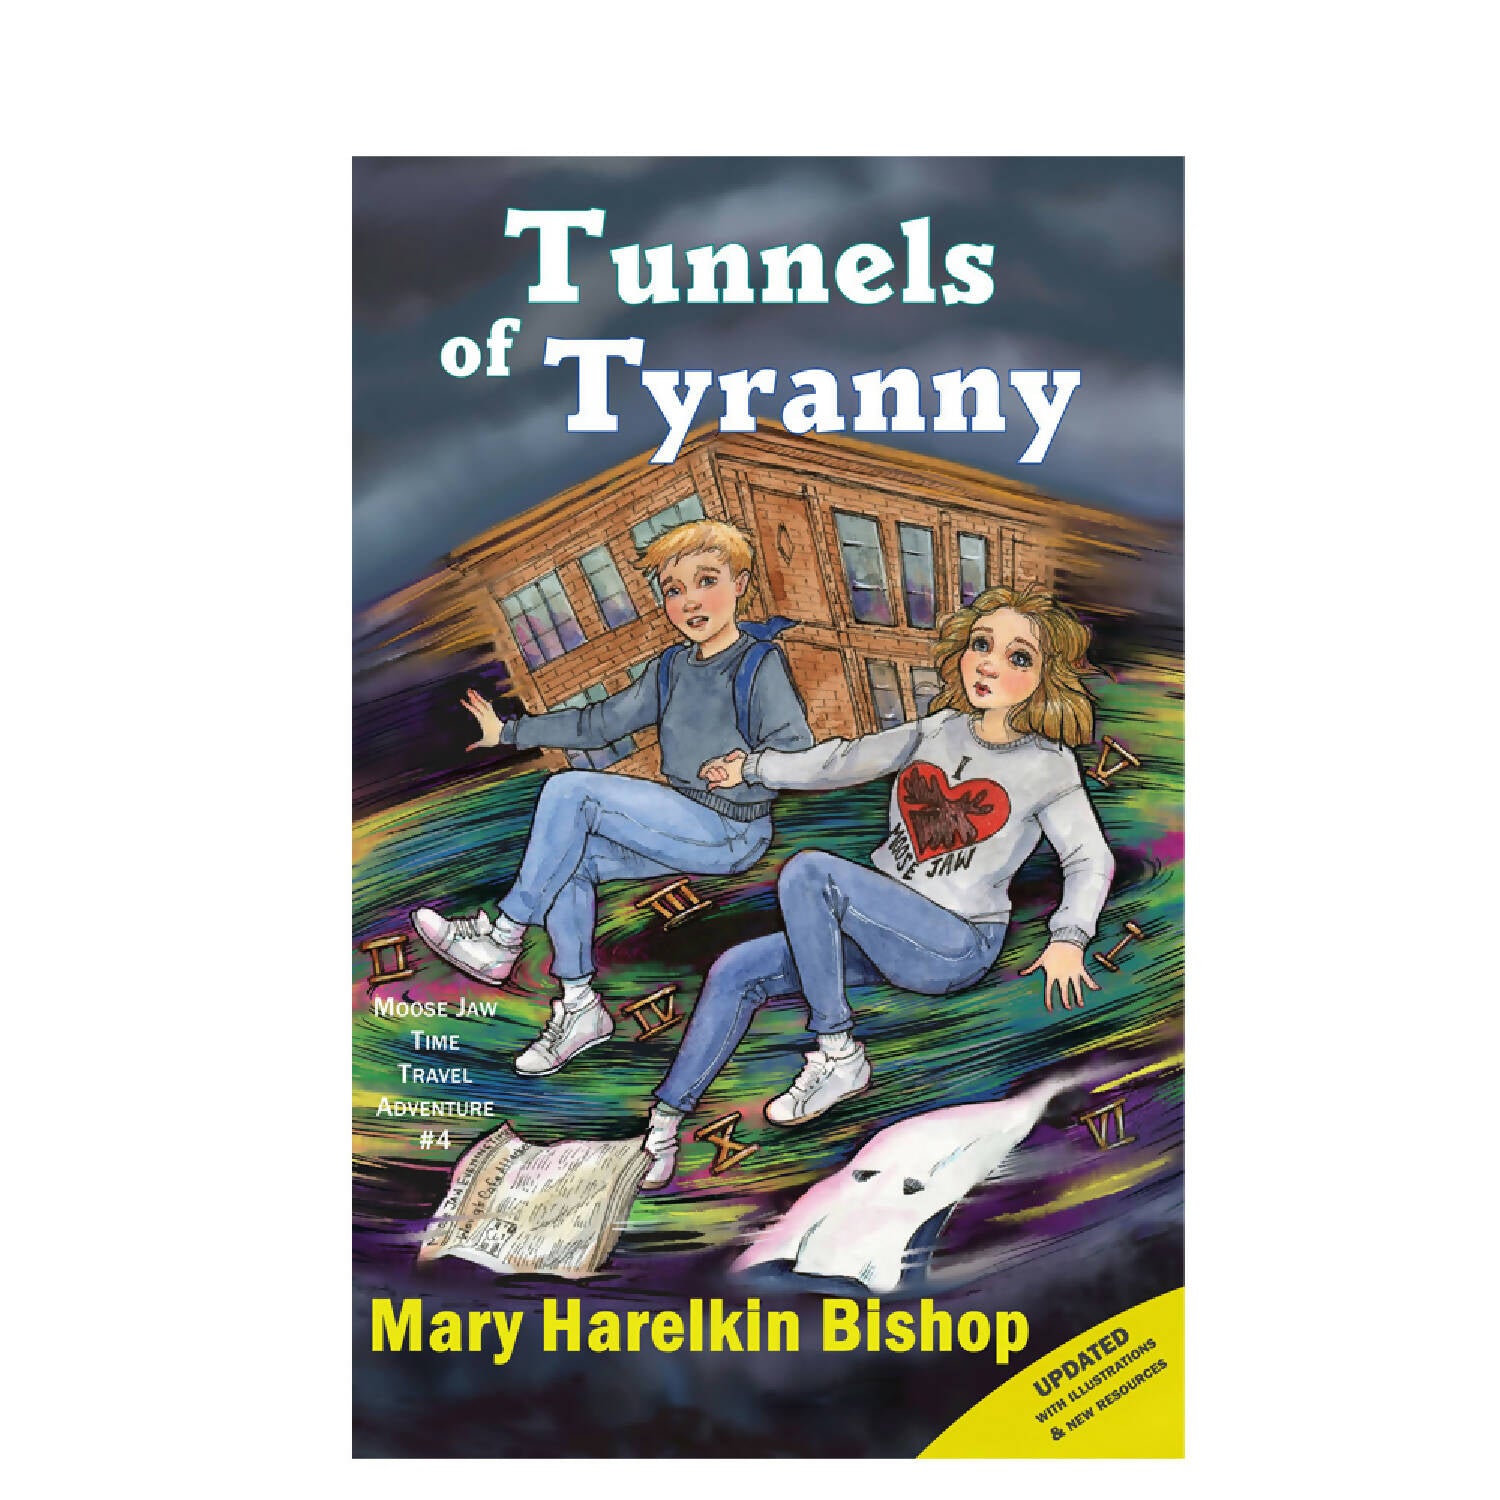 Tunnels of Tyranny - Adventure #4 by Mary Harelkin Bishop